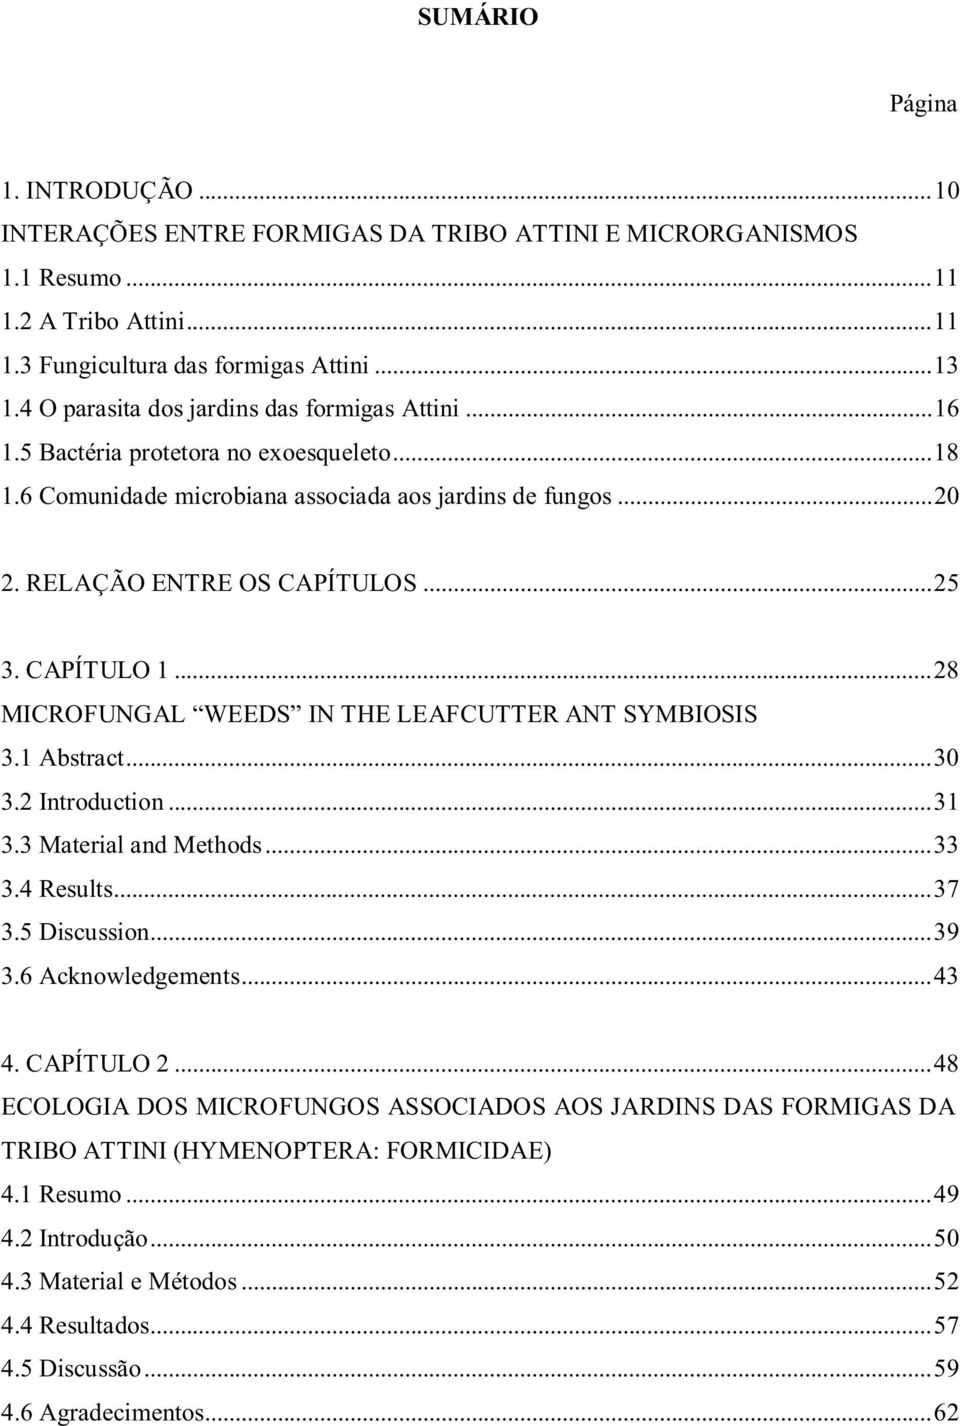 CAPÍTULO 1... 28 MICROFUNGAL WEEDS IN THE LEAFCUTTER ANT SYMBIOSIS 3.1 Abstract... 30 3.2 Introduction... 31 3.3 Material and Methods... 33 3.4 Results... 37 3.5 Discussion... 39 3.6 Acknowledgements.